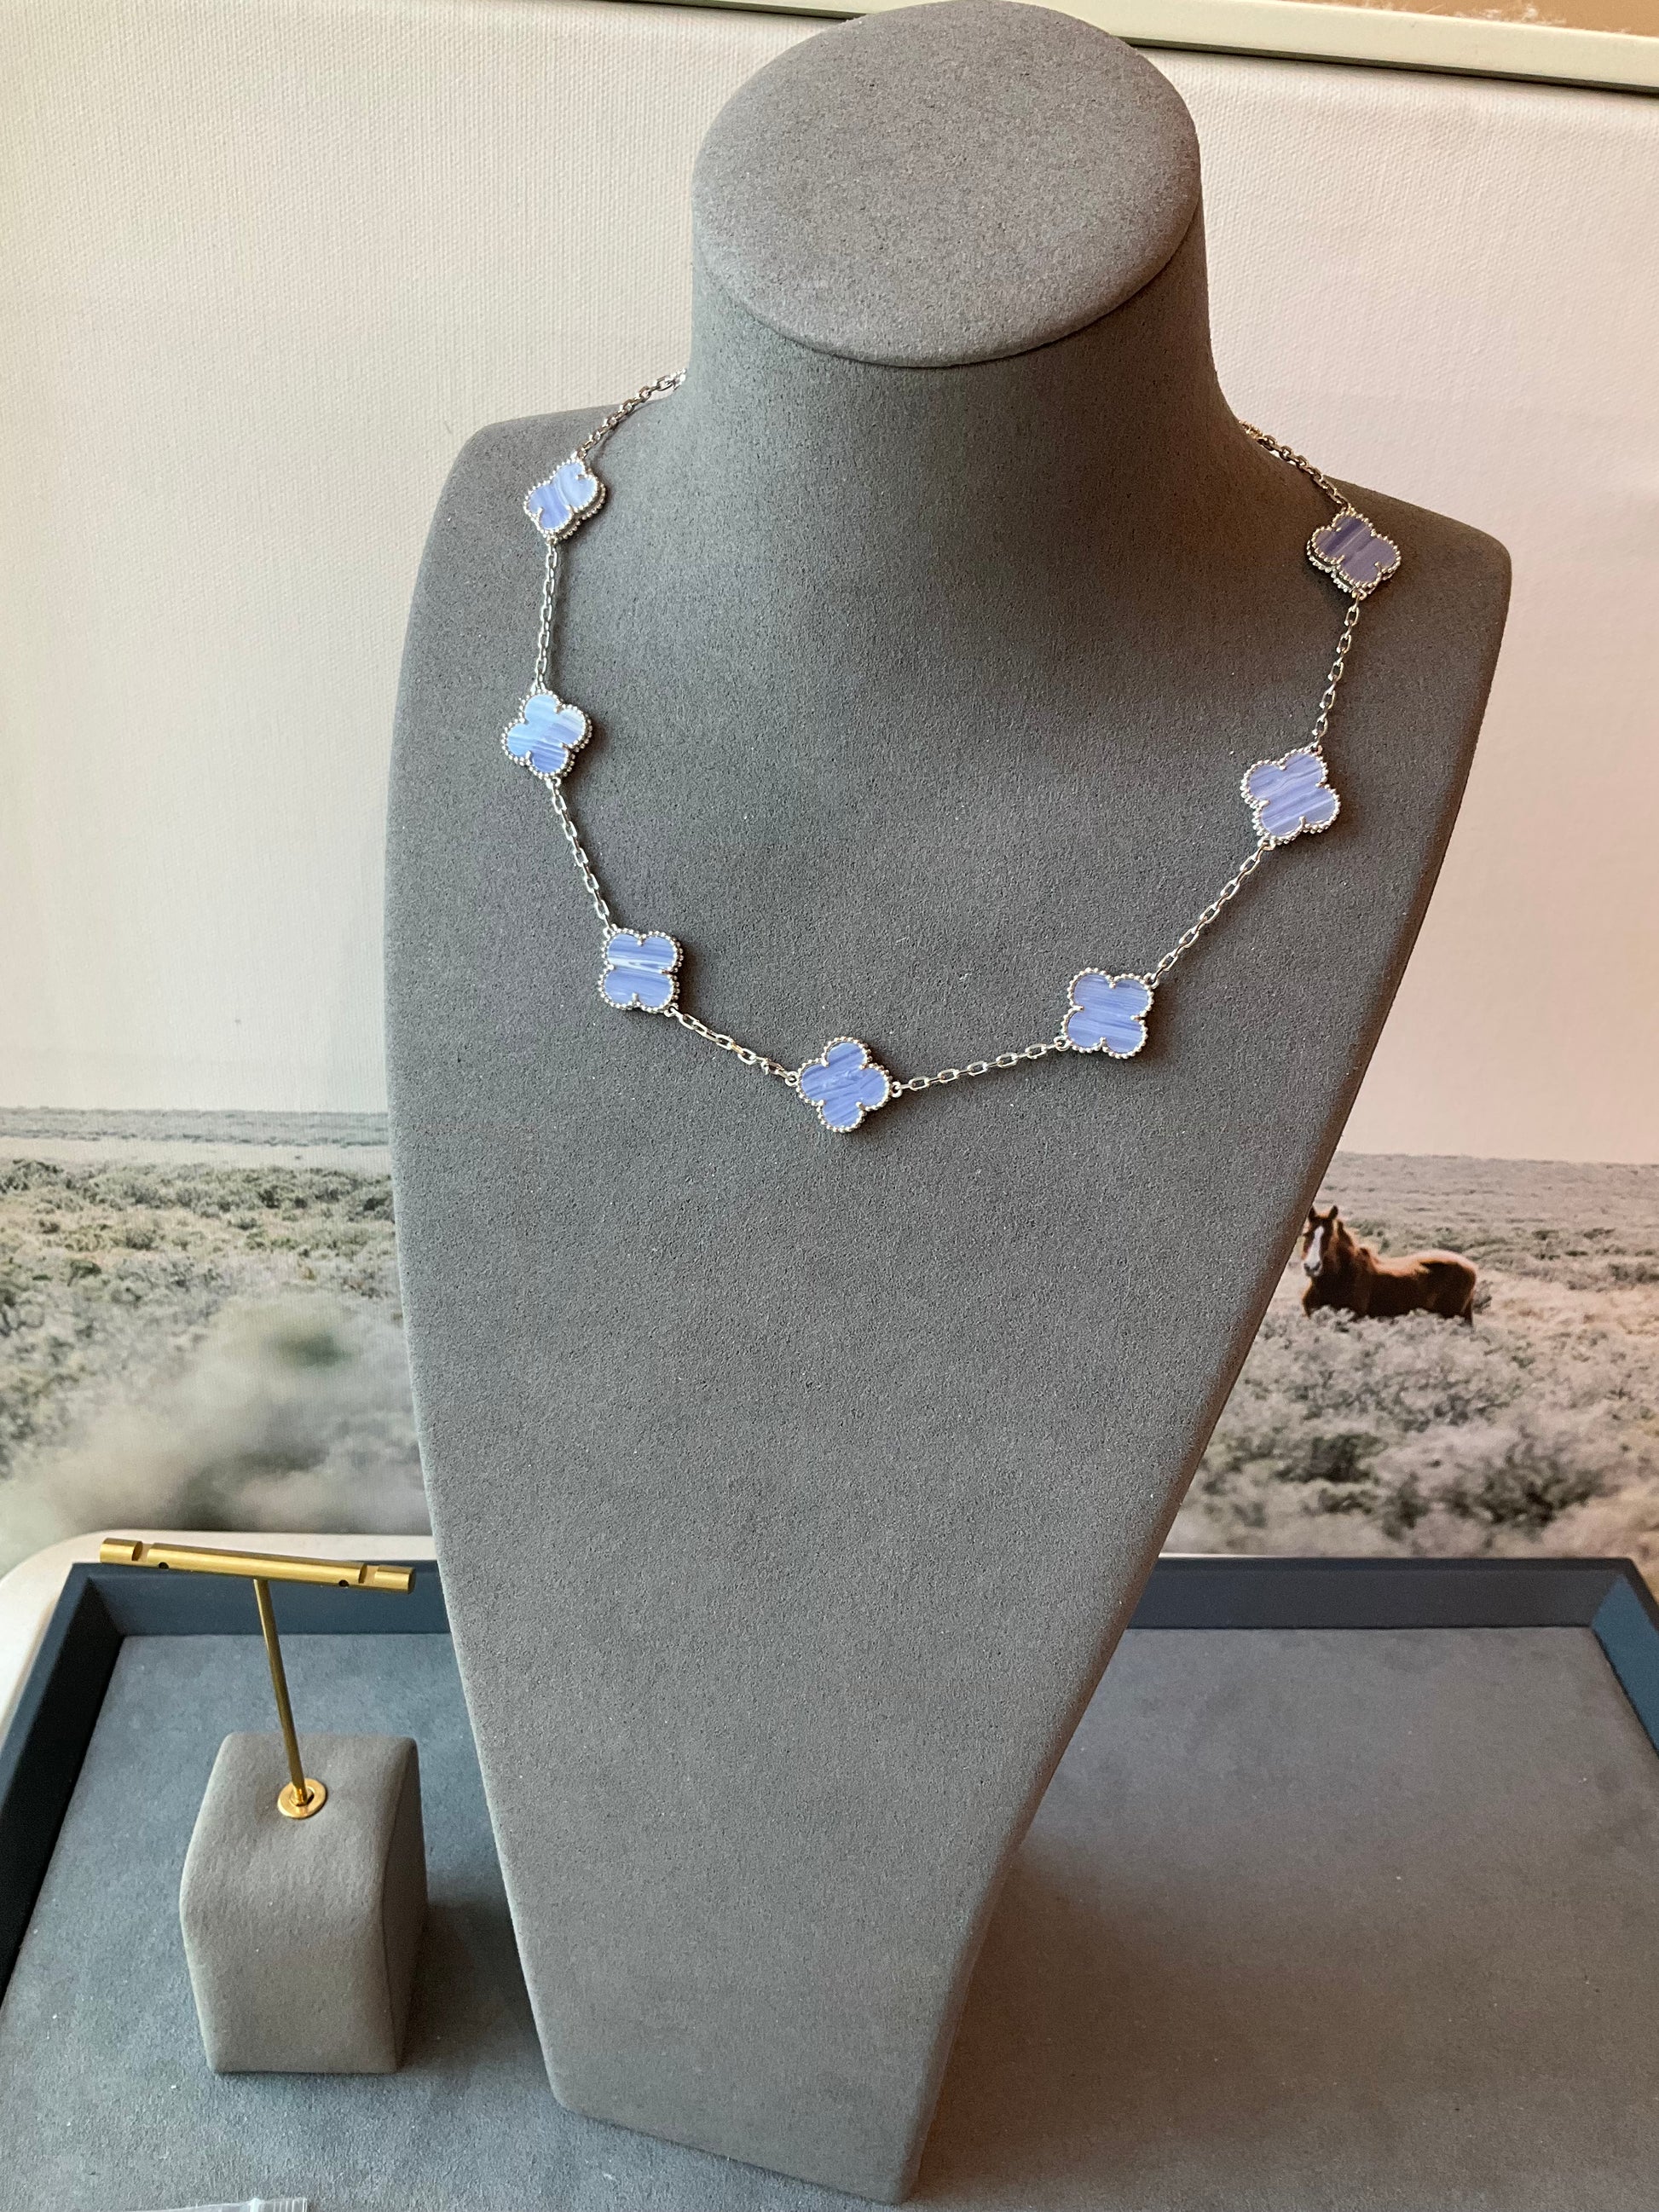 10 motifs Chalcedony 15mm clover necklace 925 silver 18k white gold plated 42cm long - ParadiseKissCo